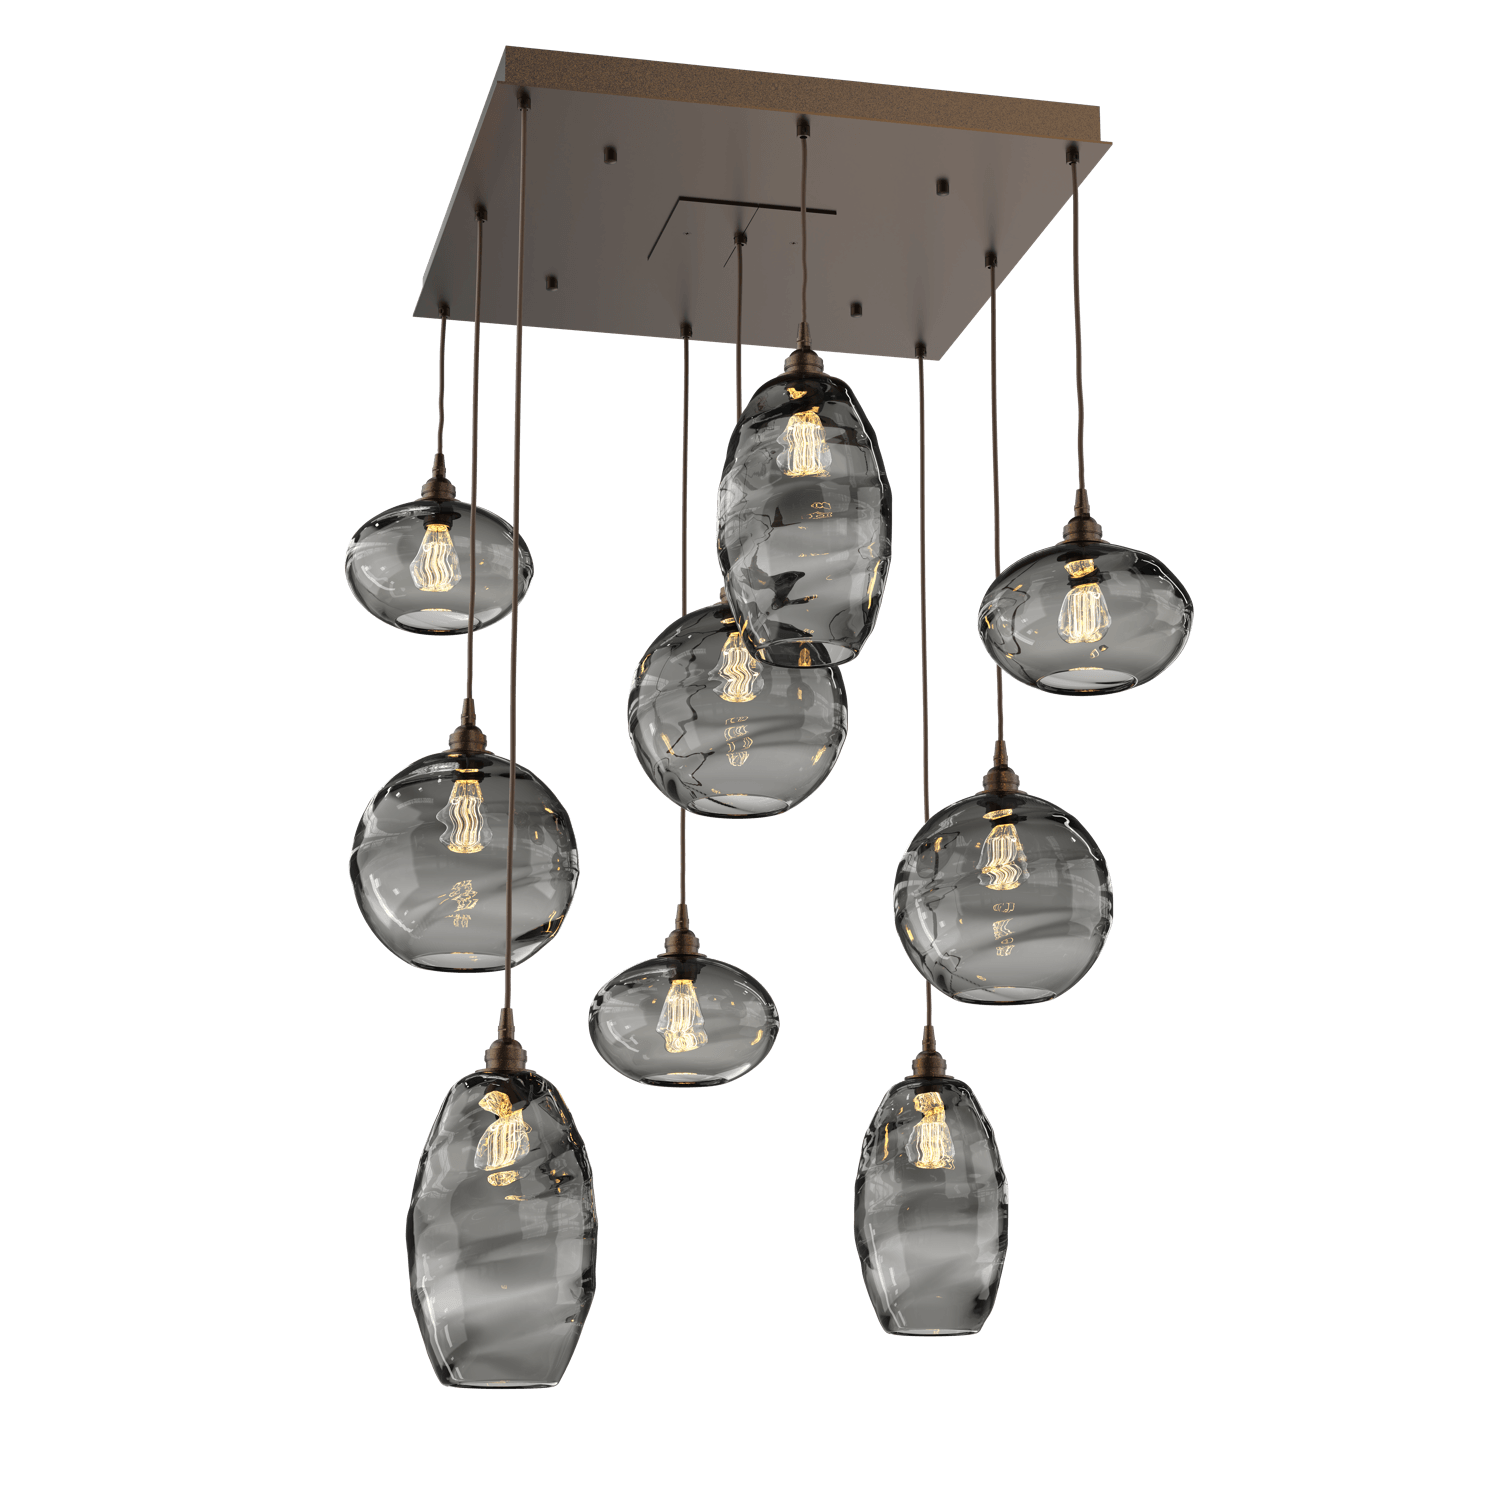 CHB0048-09-FB-OS-Hammerton-Studio-Optic-Blown-Glass-Misto-9-light-square-pendant-chandelier-with-flat-bronze-finish-and-optic-smoke-blown-glass-shades-and-incandescent-lamping